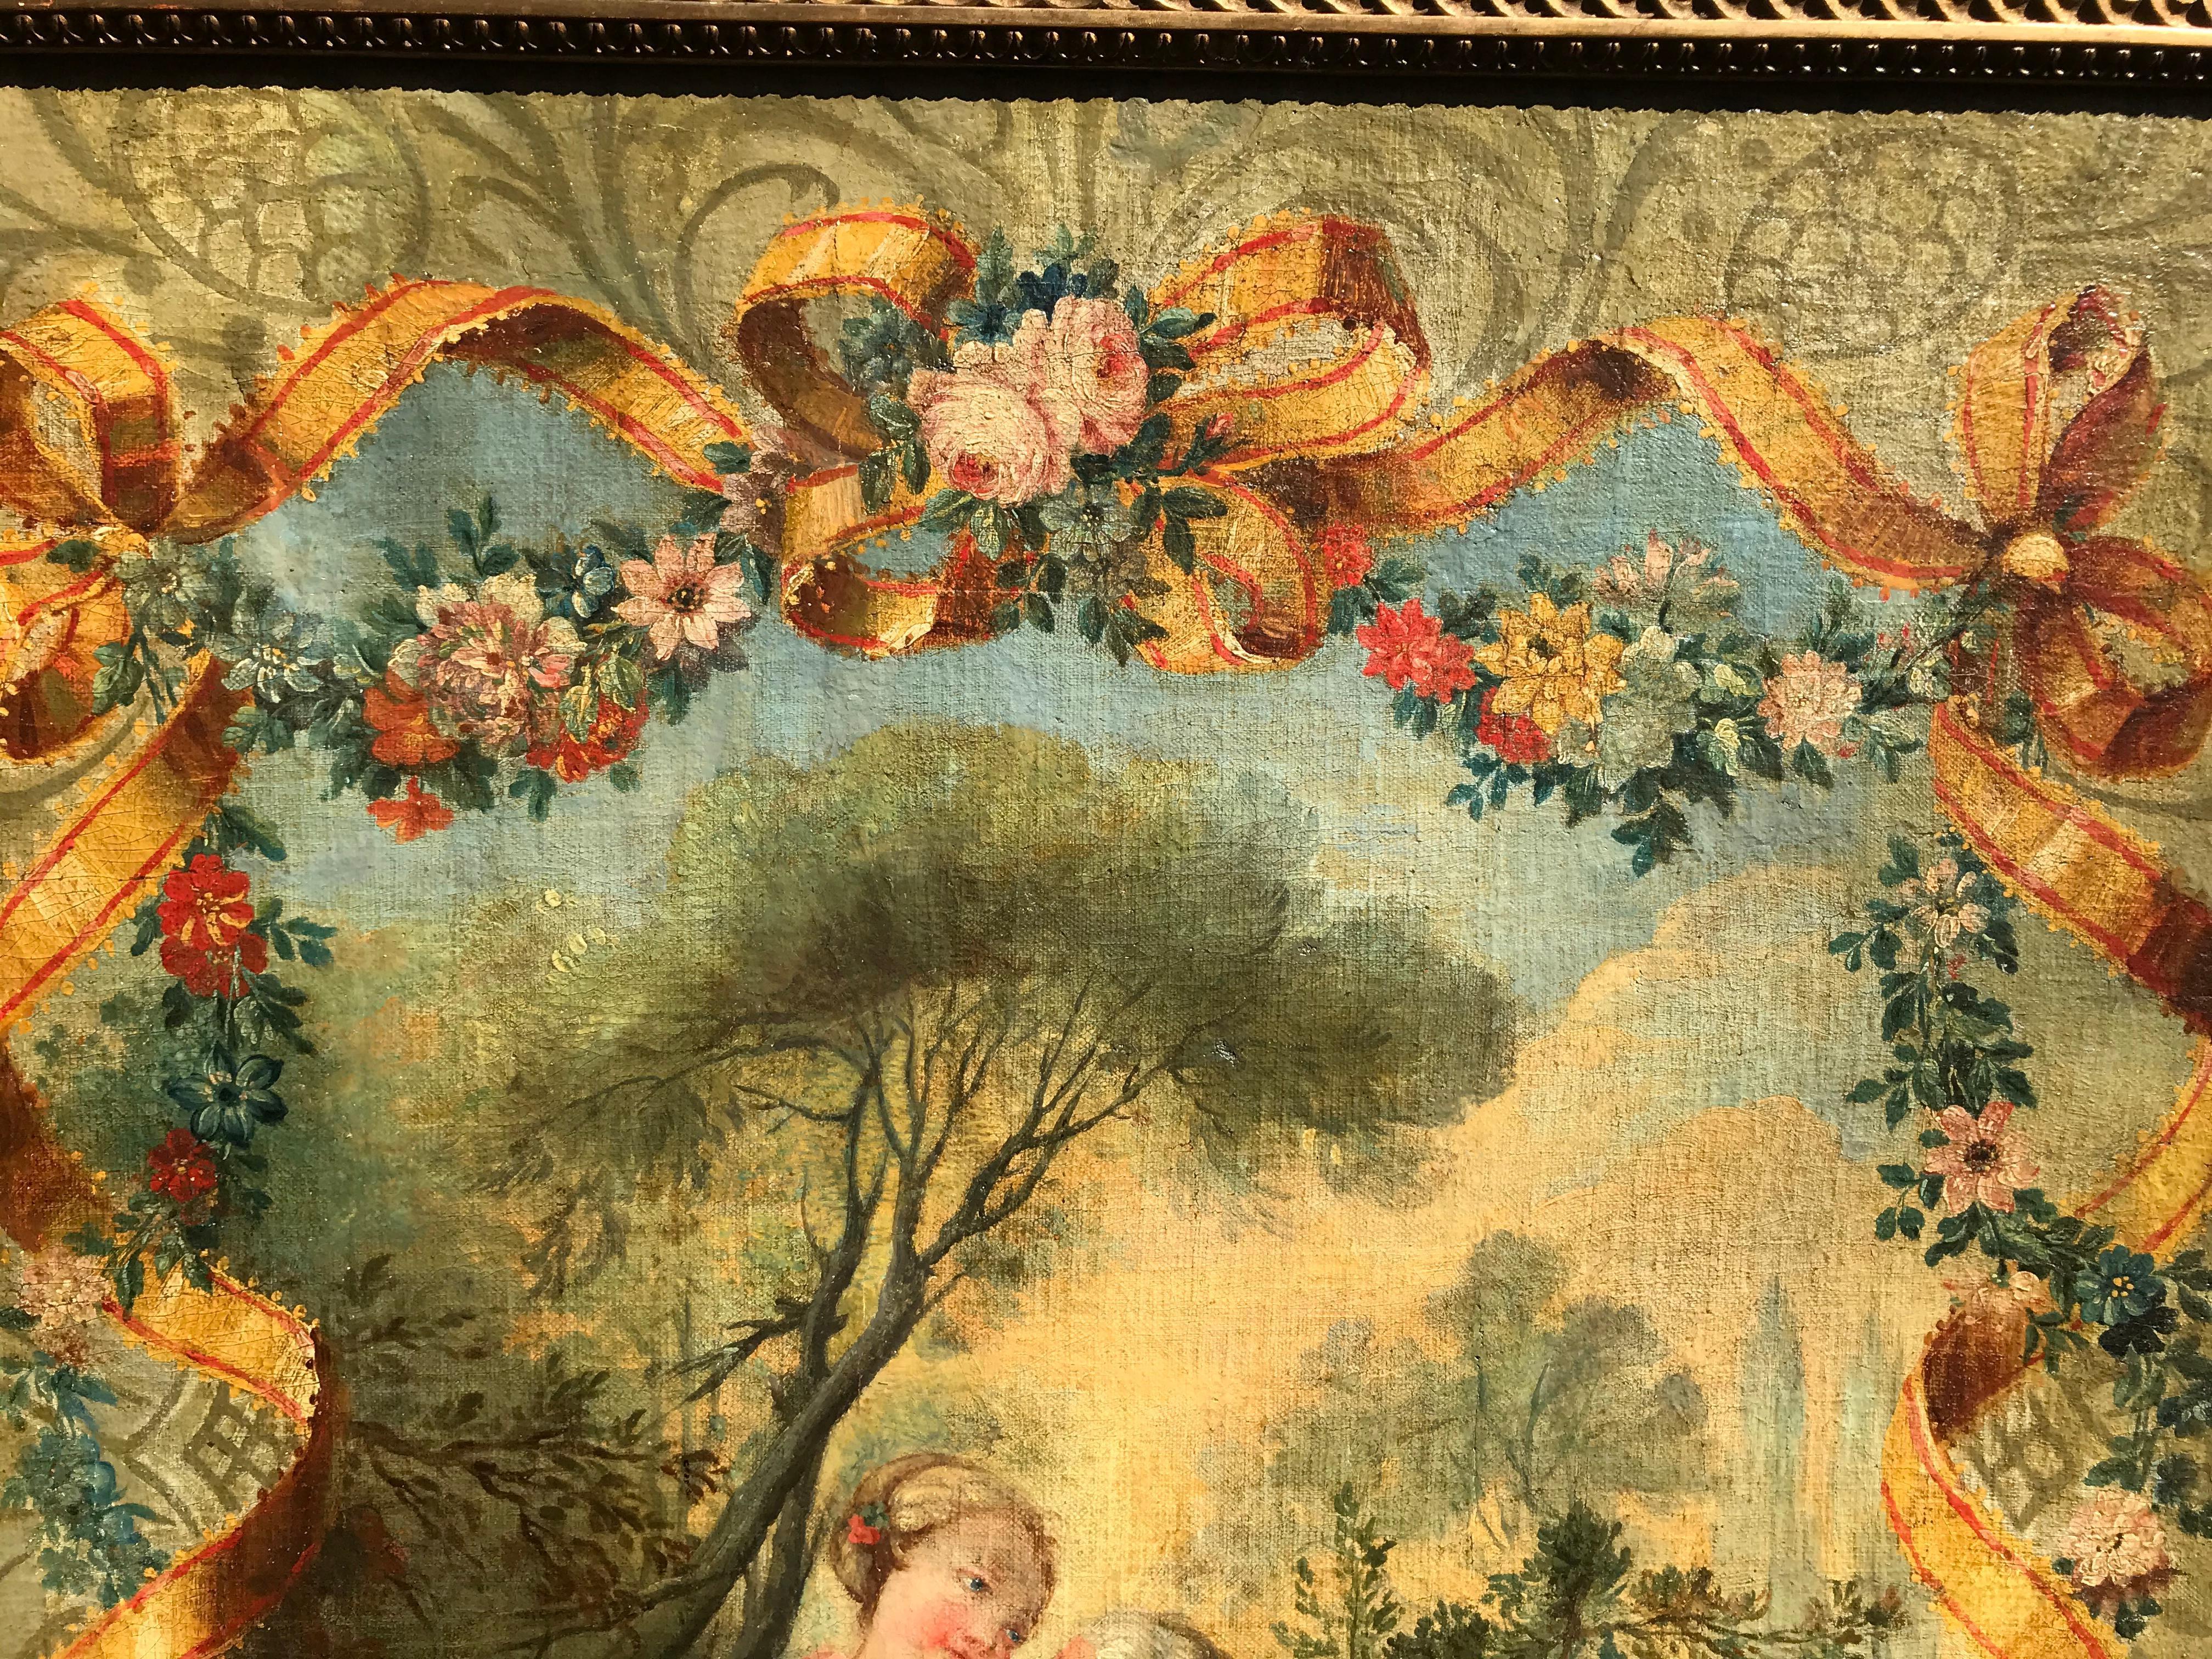 Probably a variation of ‘Spring’ After Boucher’s Four Seasons. Highly decorative. Typical rococo frivolity and color palette. Garlands and festoons of flowers with intertwined ribbon. Attractive couple in noble class dress. Warm cheerful colors as